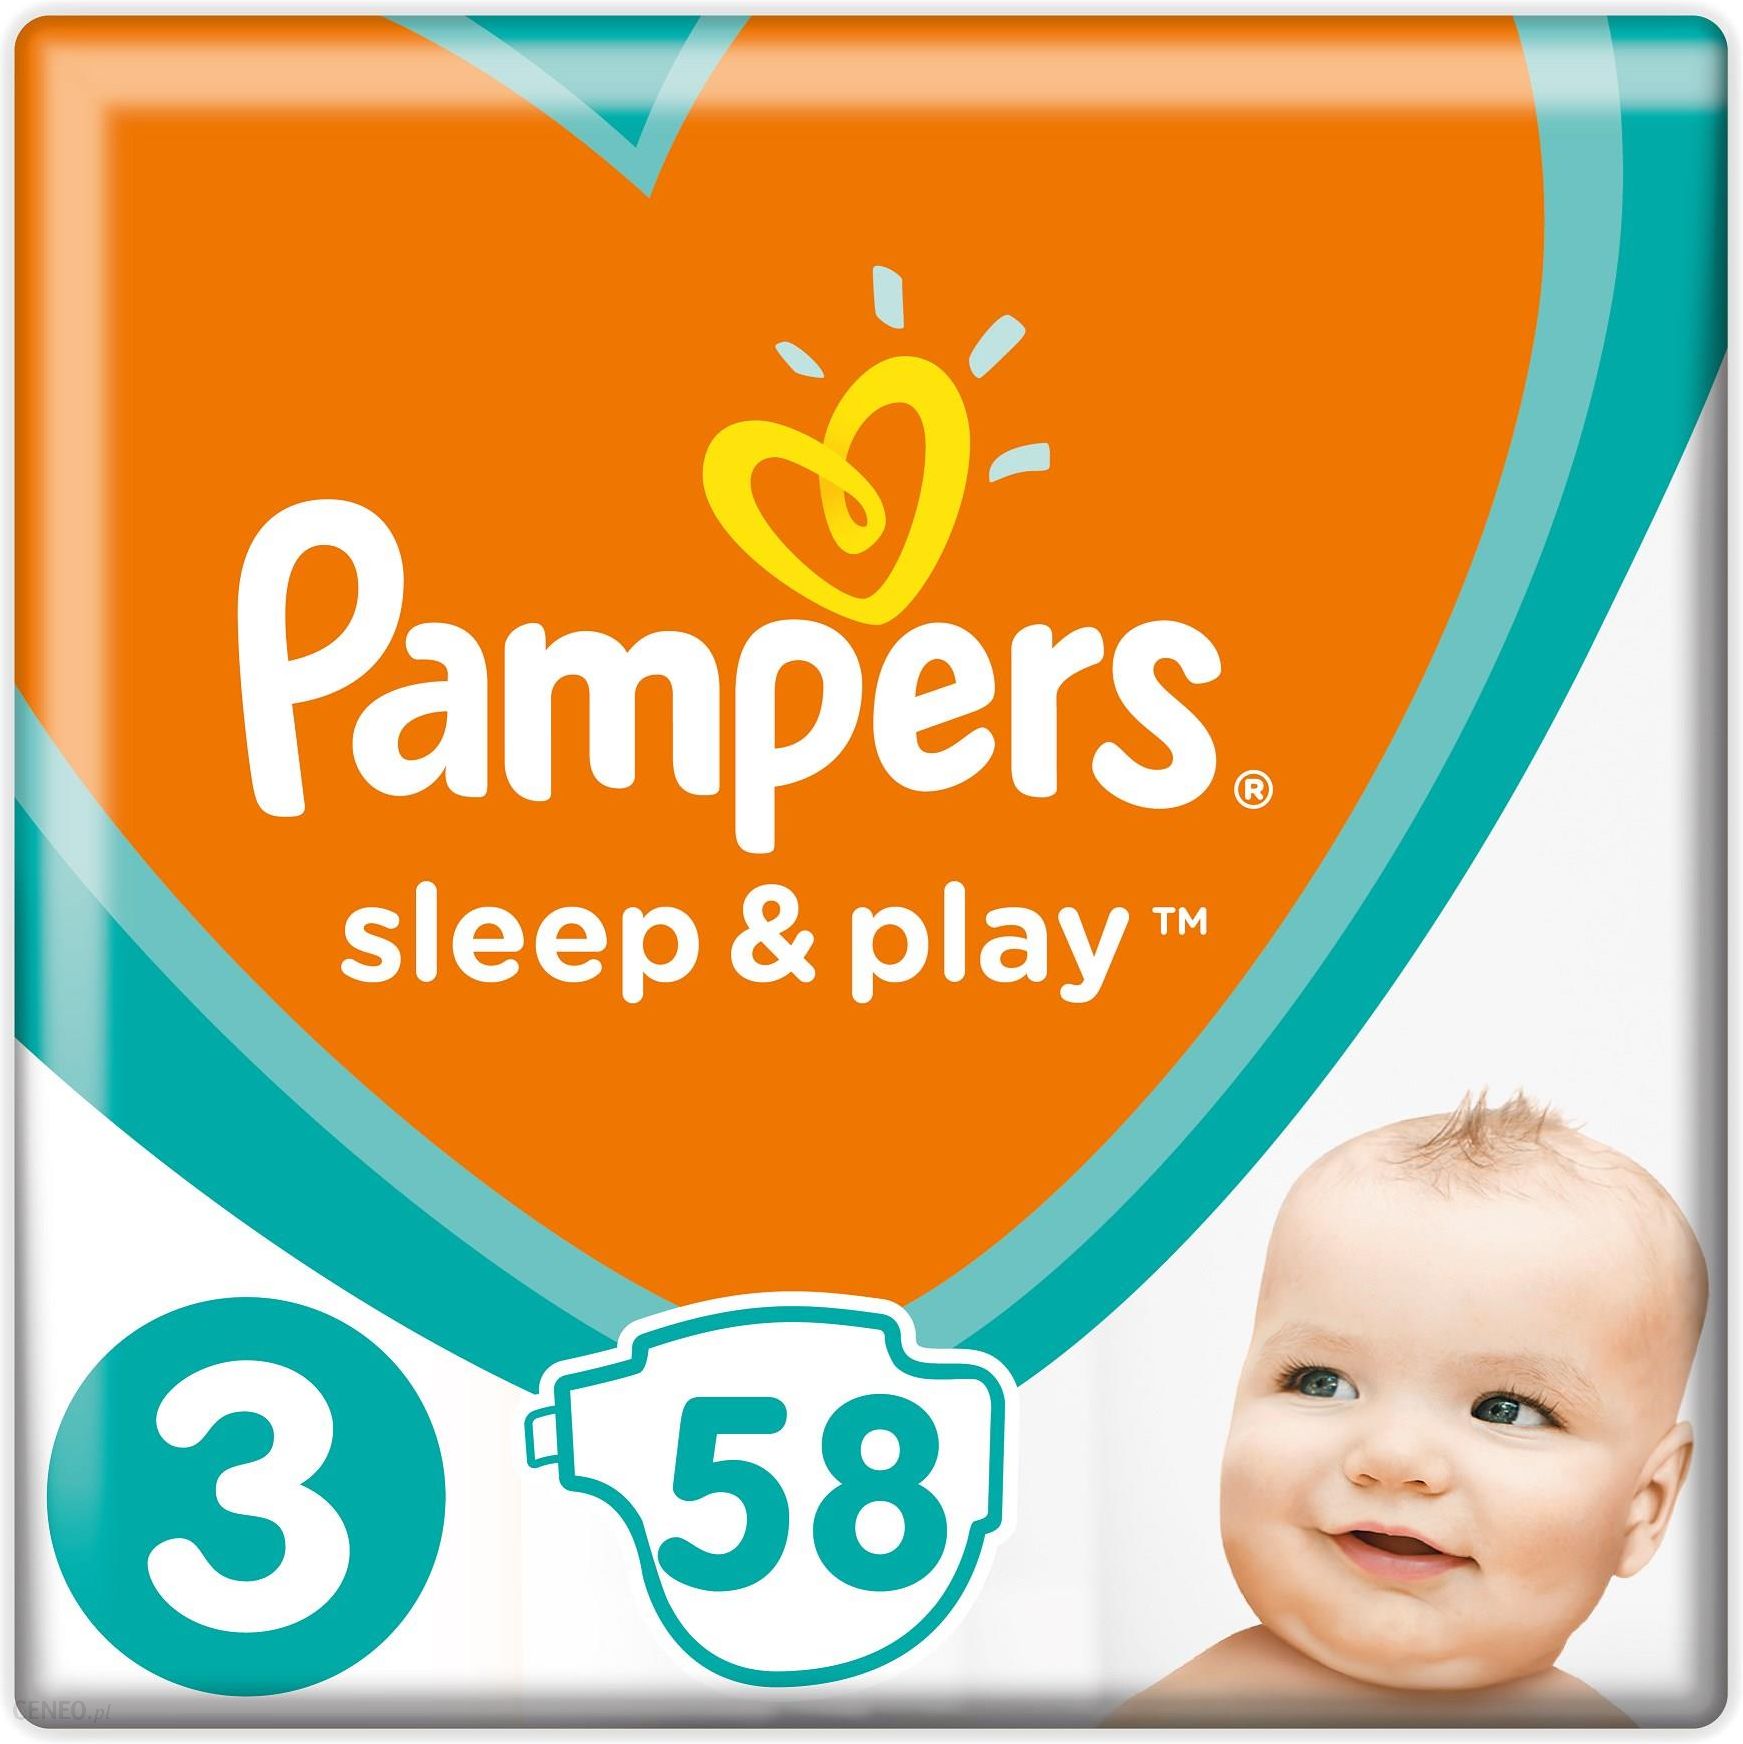 essity pampers